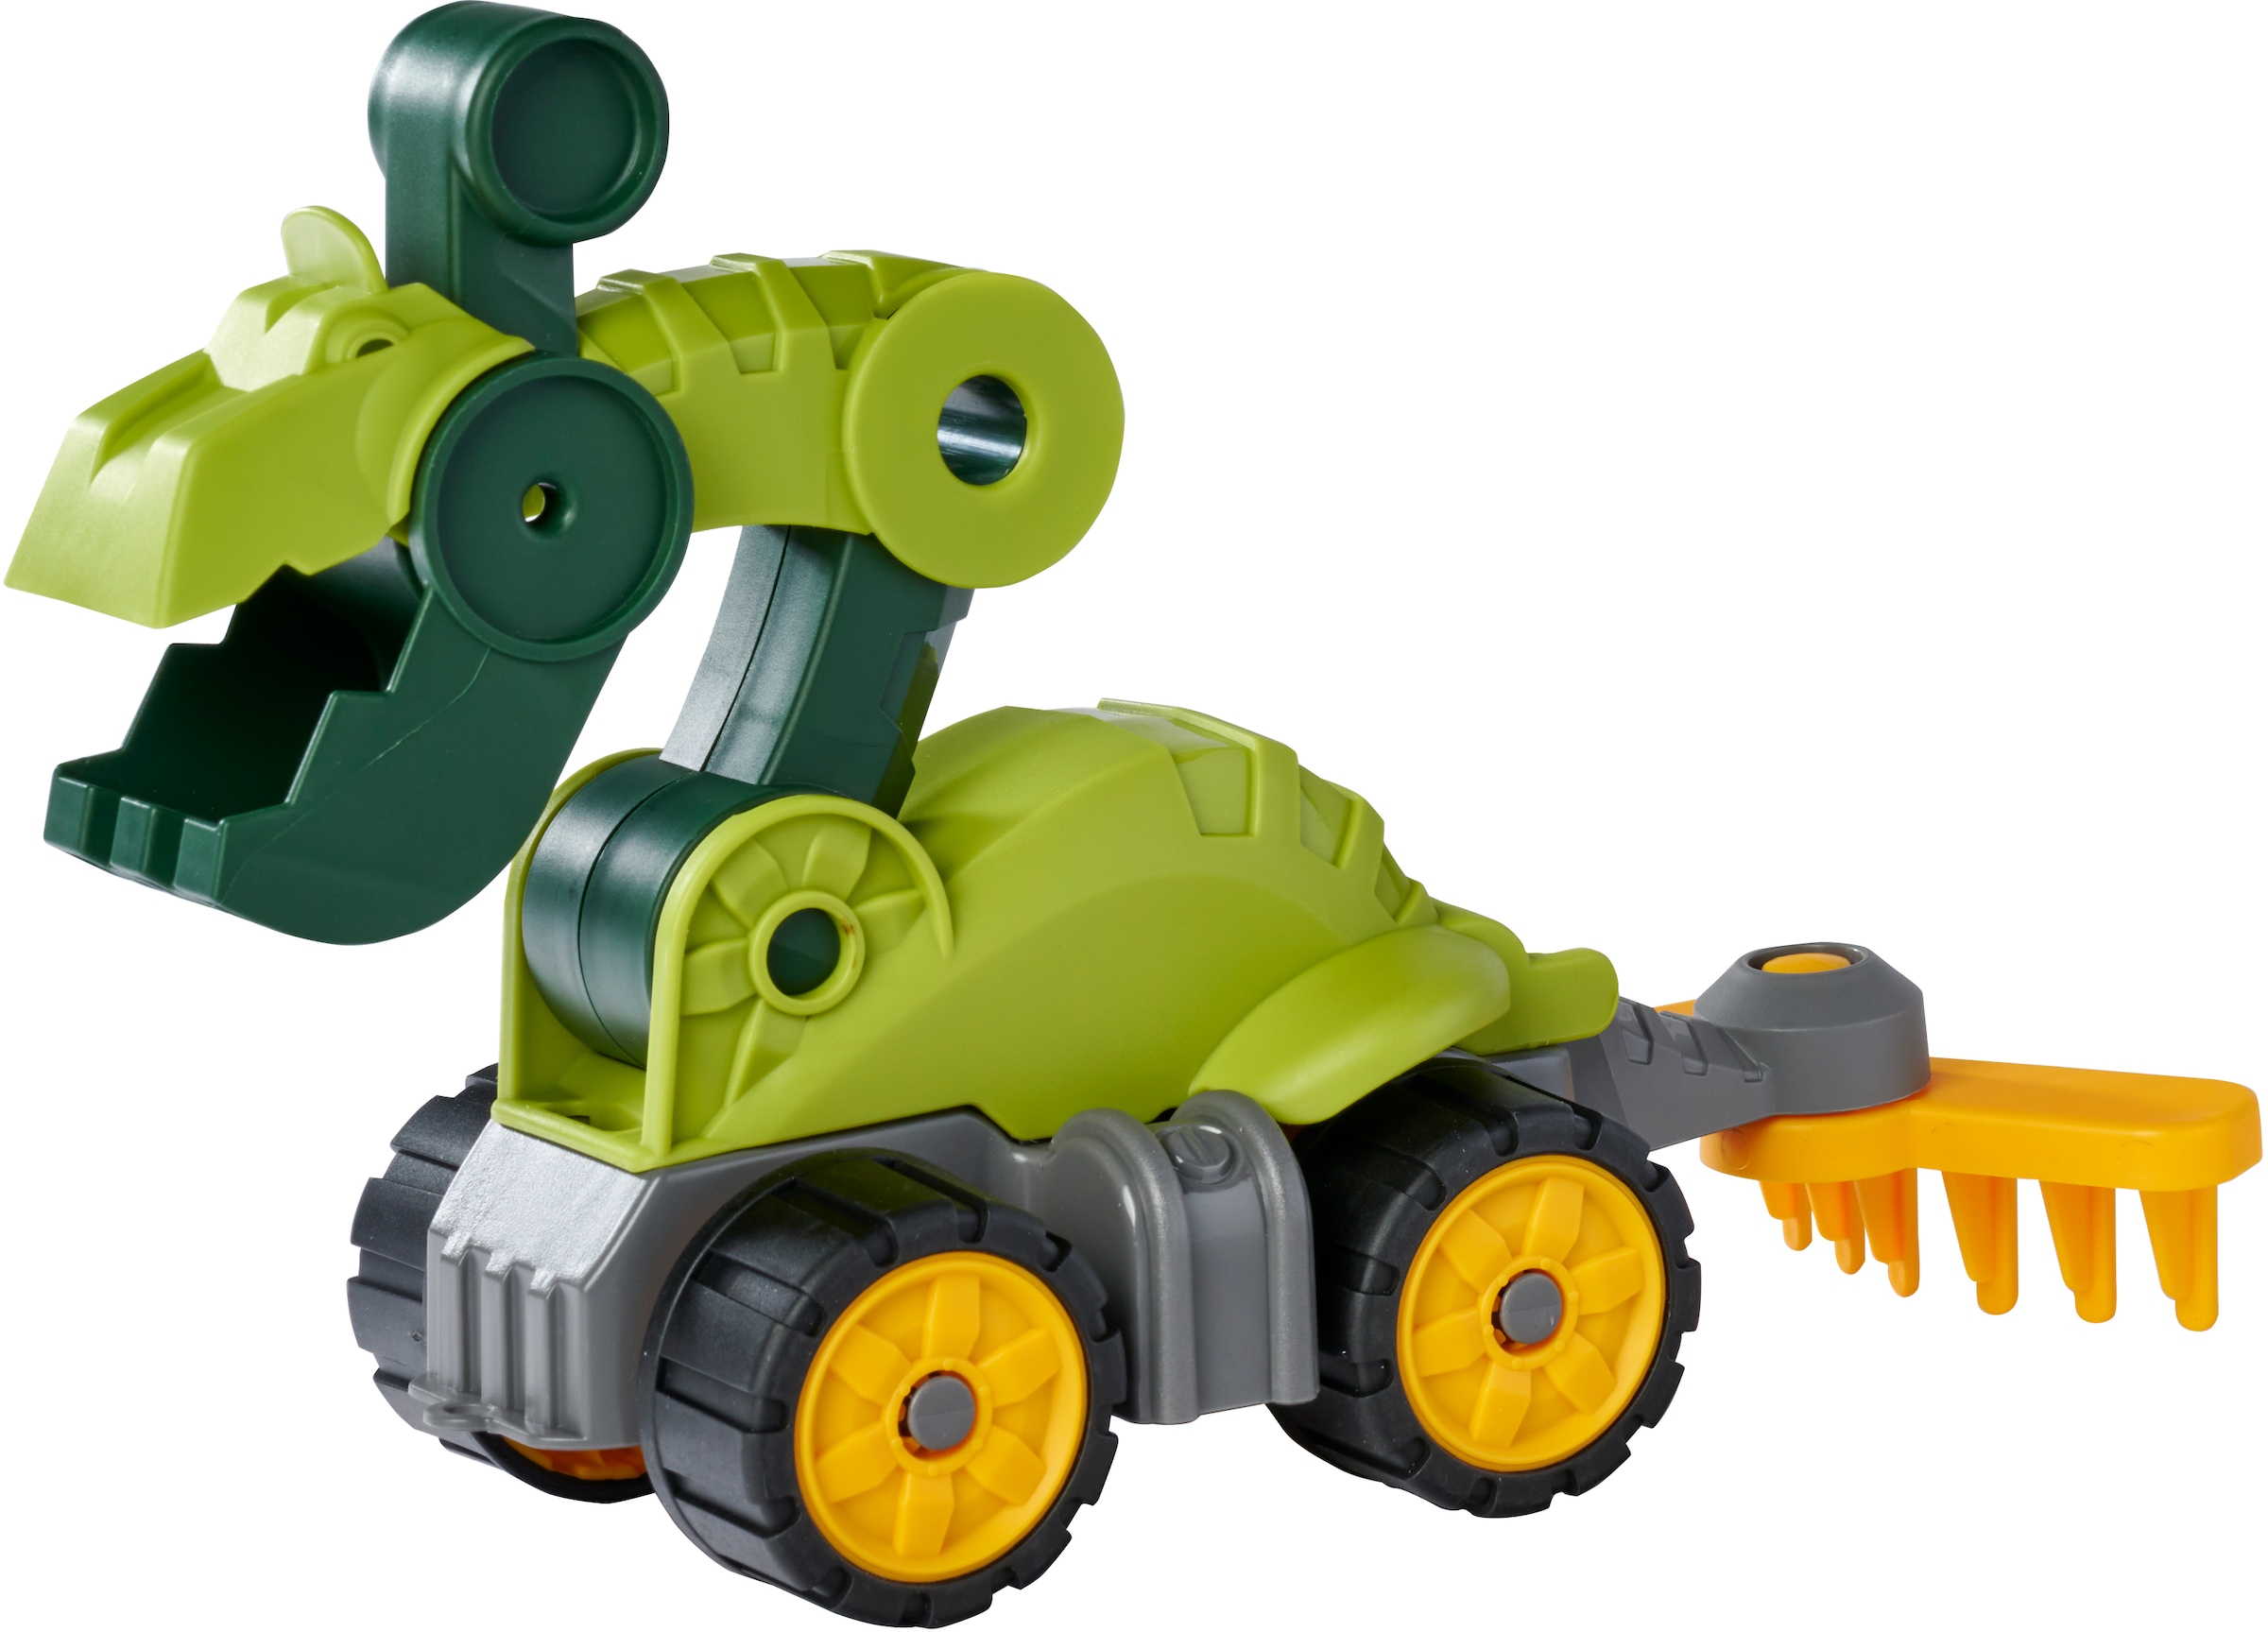 Spielzeug-Bagger »Power Worker Mini Dino T-Rex«, Made in Germany